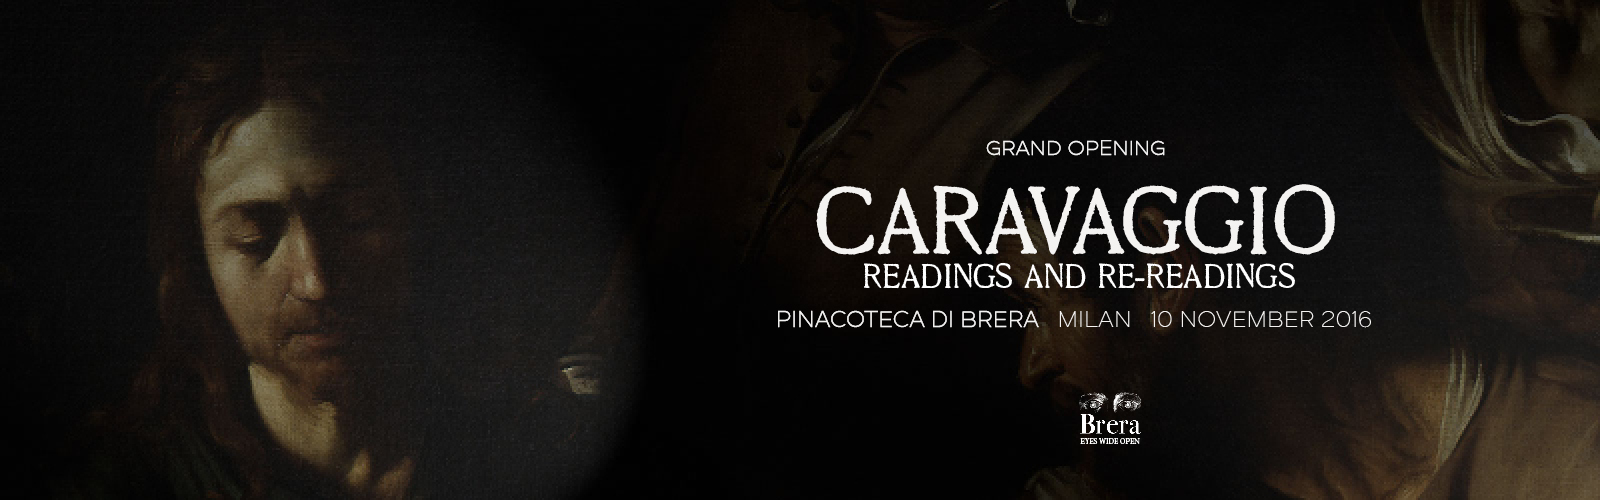 Opening of the third dialogue “Caravaggio. Readings and re-readings”